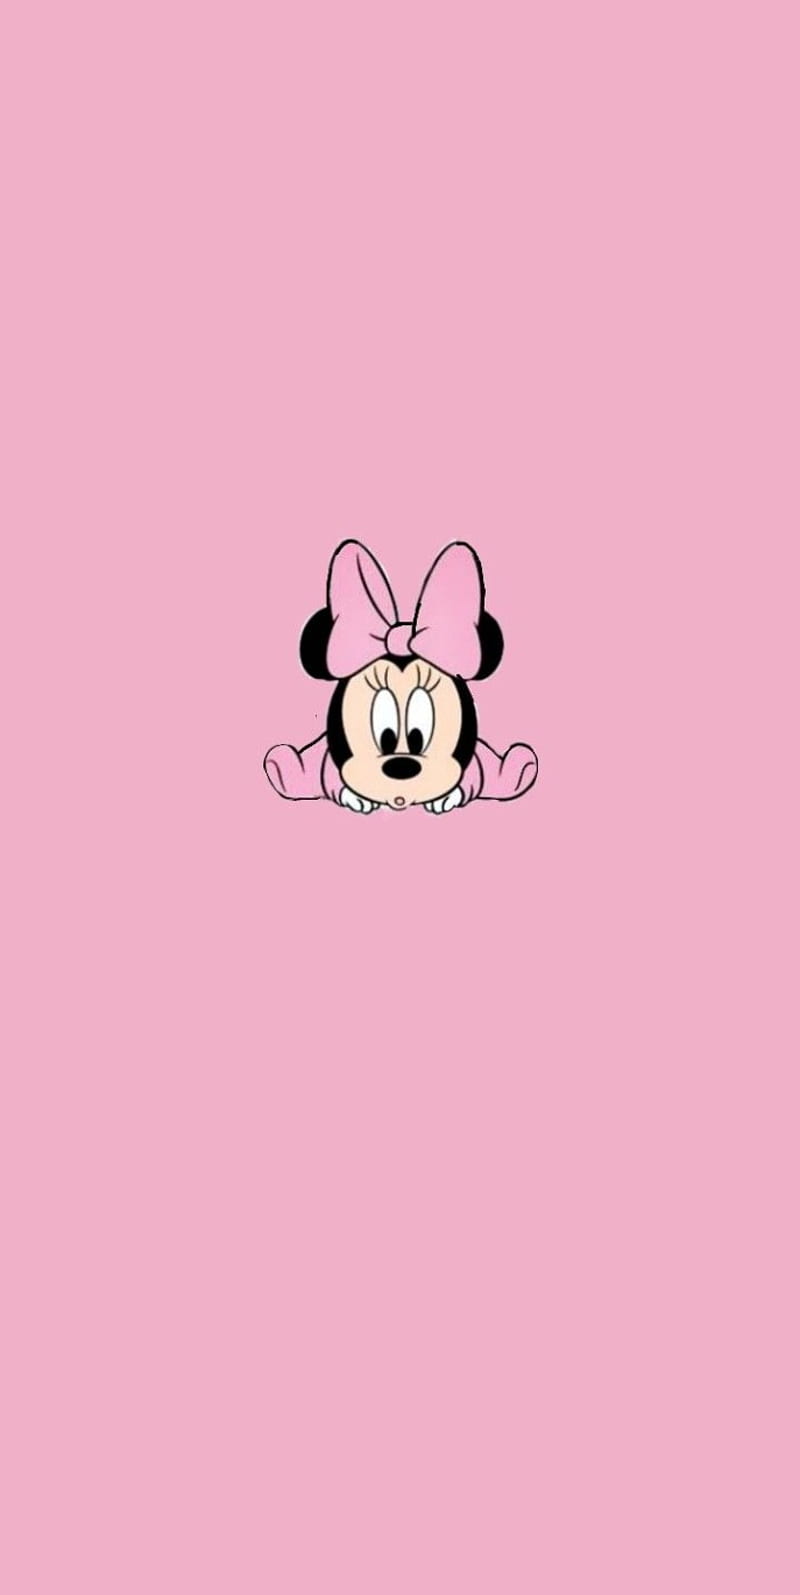 Minnie Mouse iPhone Wallpaper with high-resolution 1080x1920 pixel. You can use this wallpaper for your iPhone 5, 6, 7, 8, X, XS, XR backgrounds, Mobile Screensaver, or iPad Lock Screen - Disney, Mickey Mouse, Minnie Mouse, cute iPhone, baby